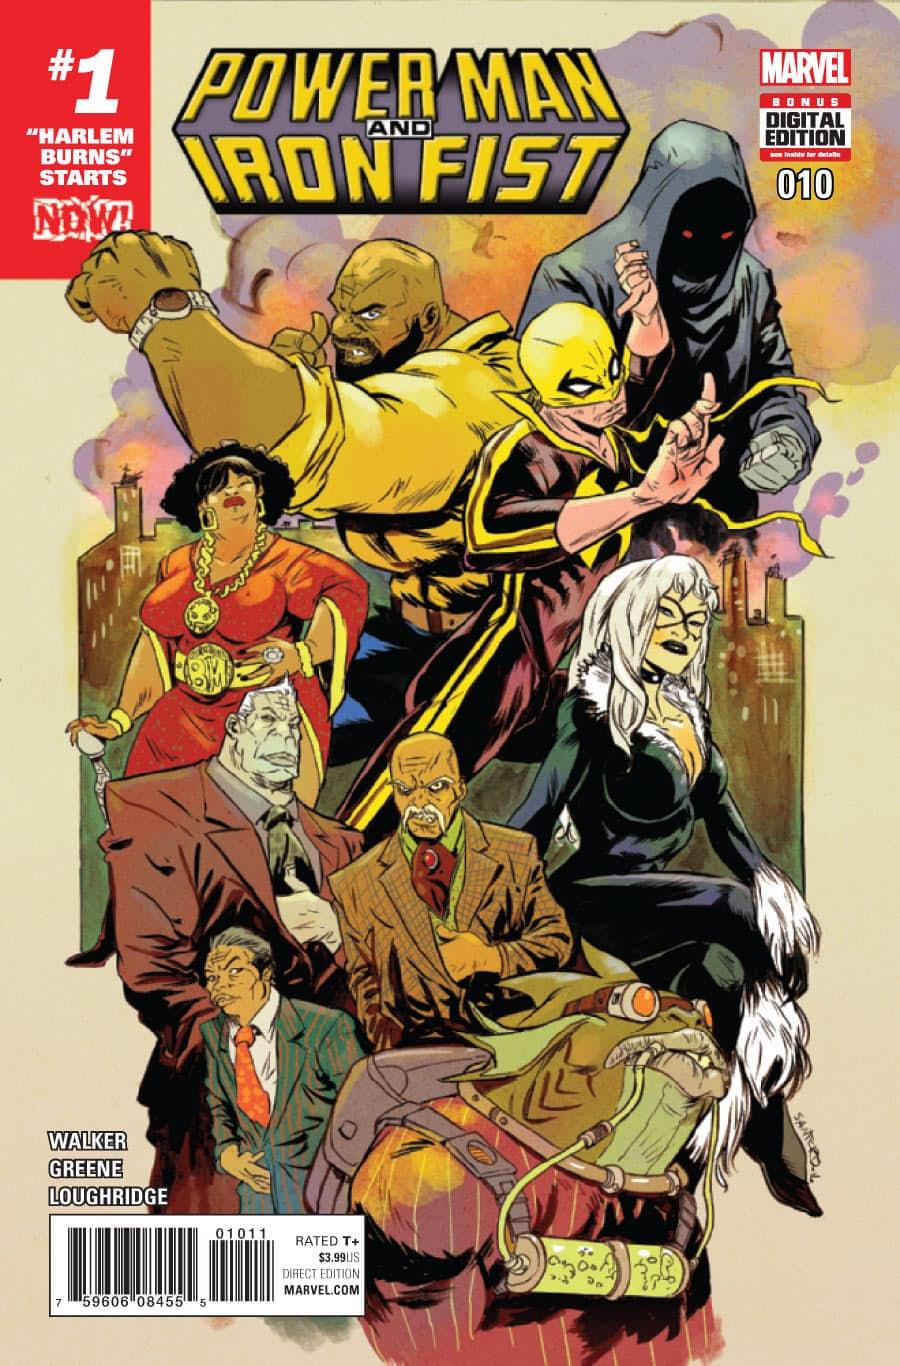 Power Man and Iron Fist Vol. 3 #10